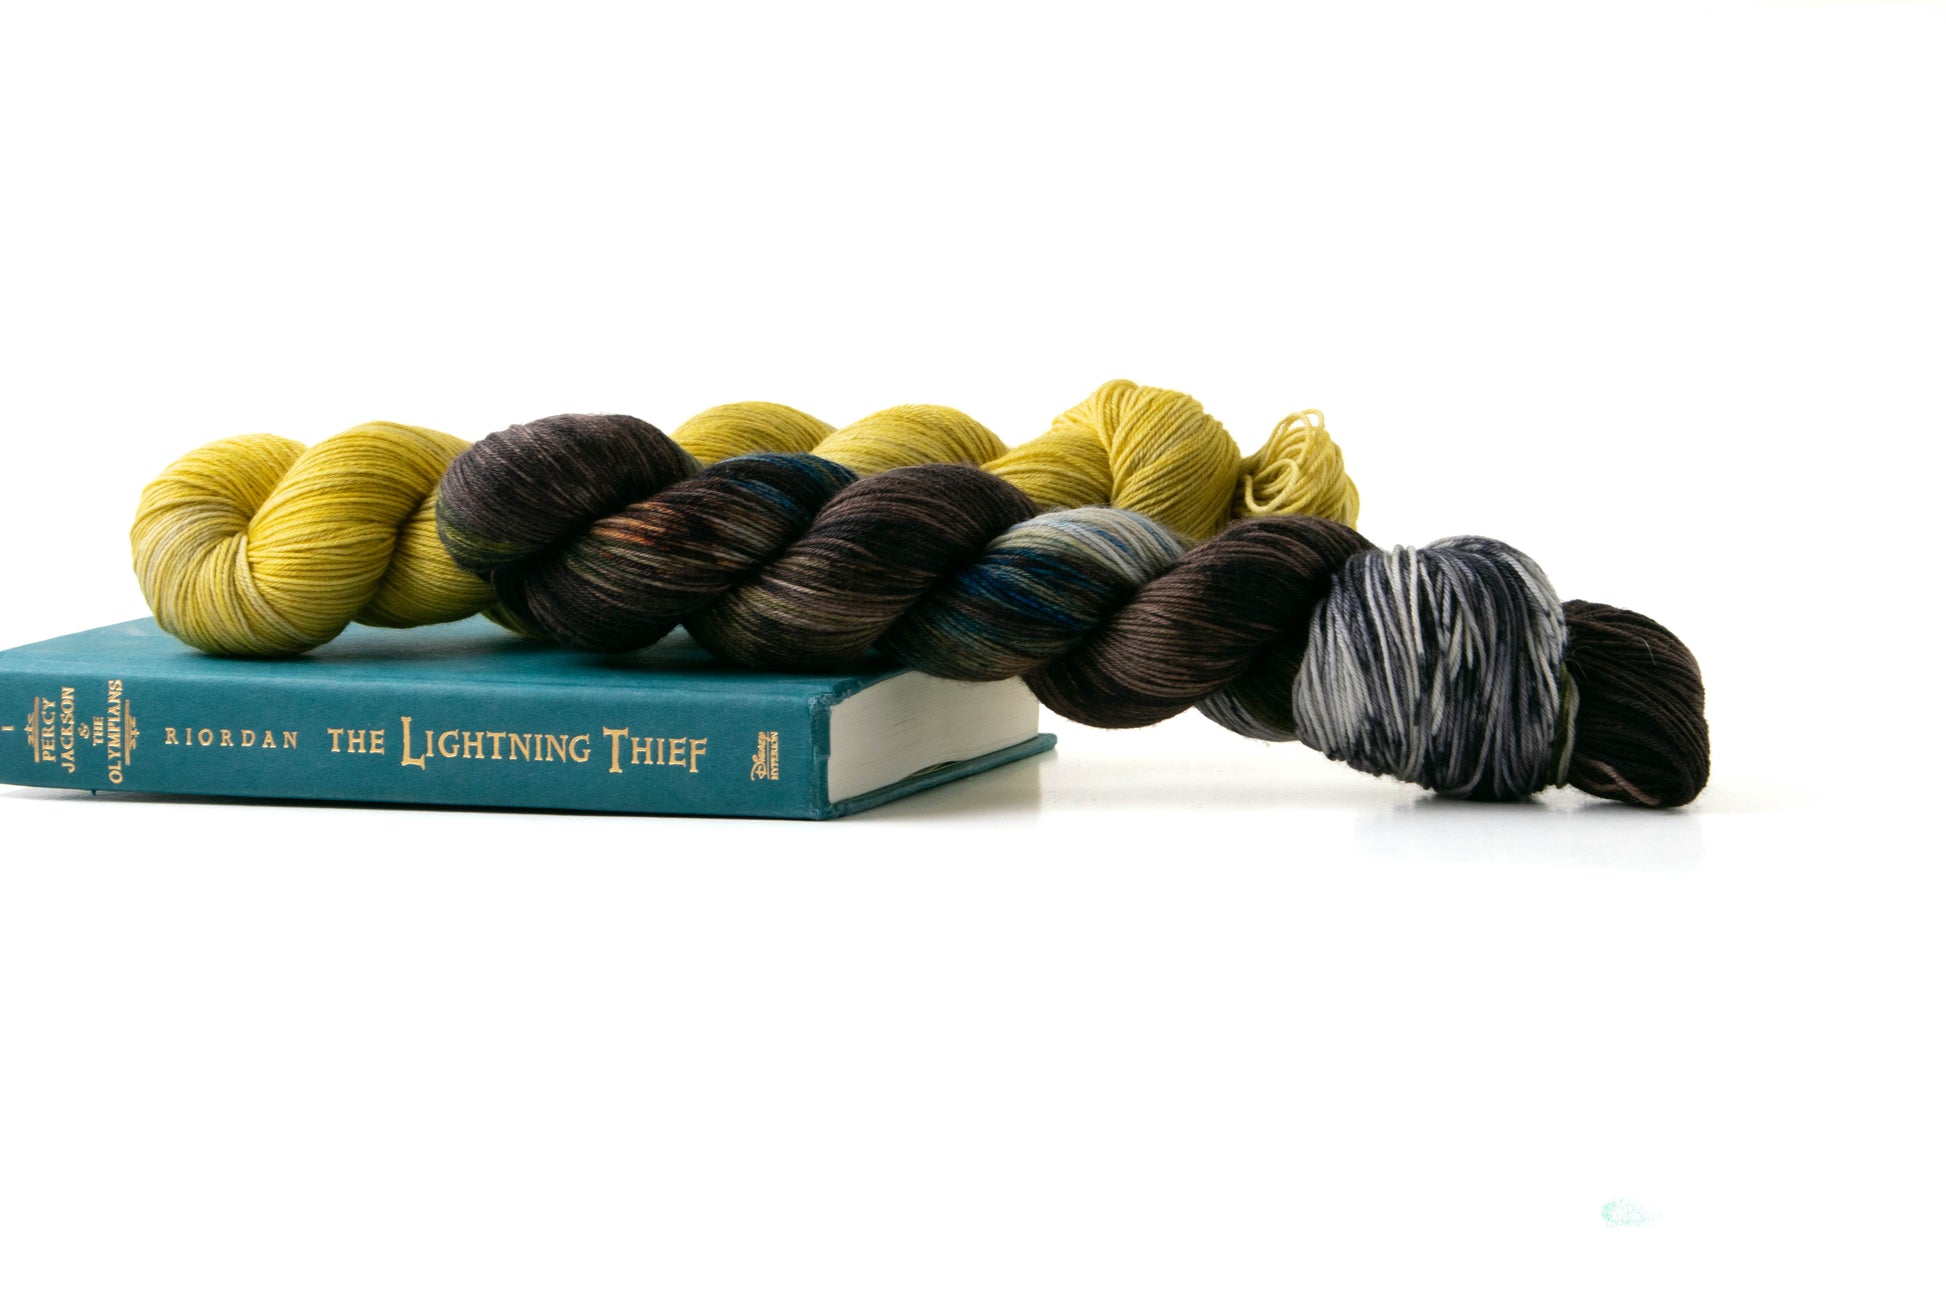 Two skeins of yarn, one variegated and one tonal, sitting on a well-loved copy of The Lightning Thief.